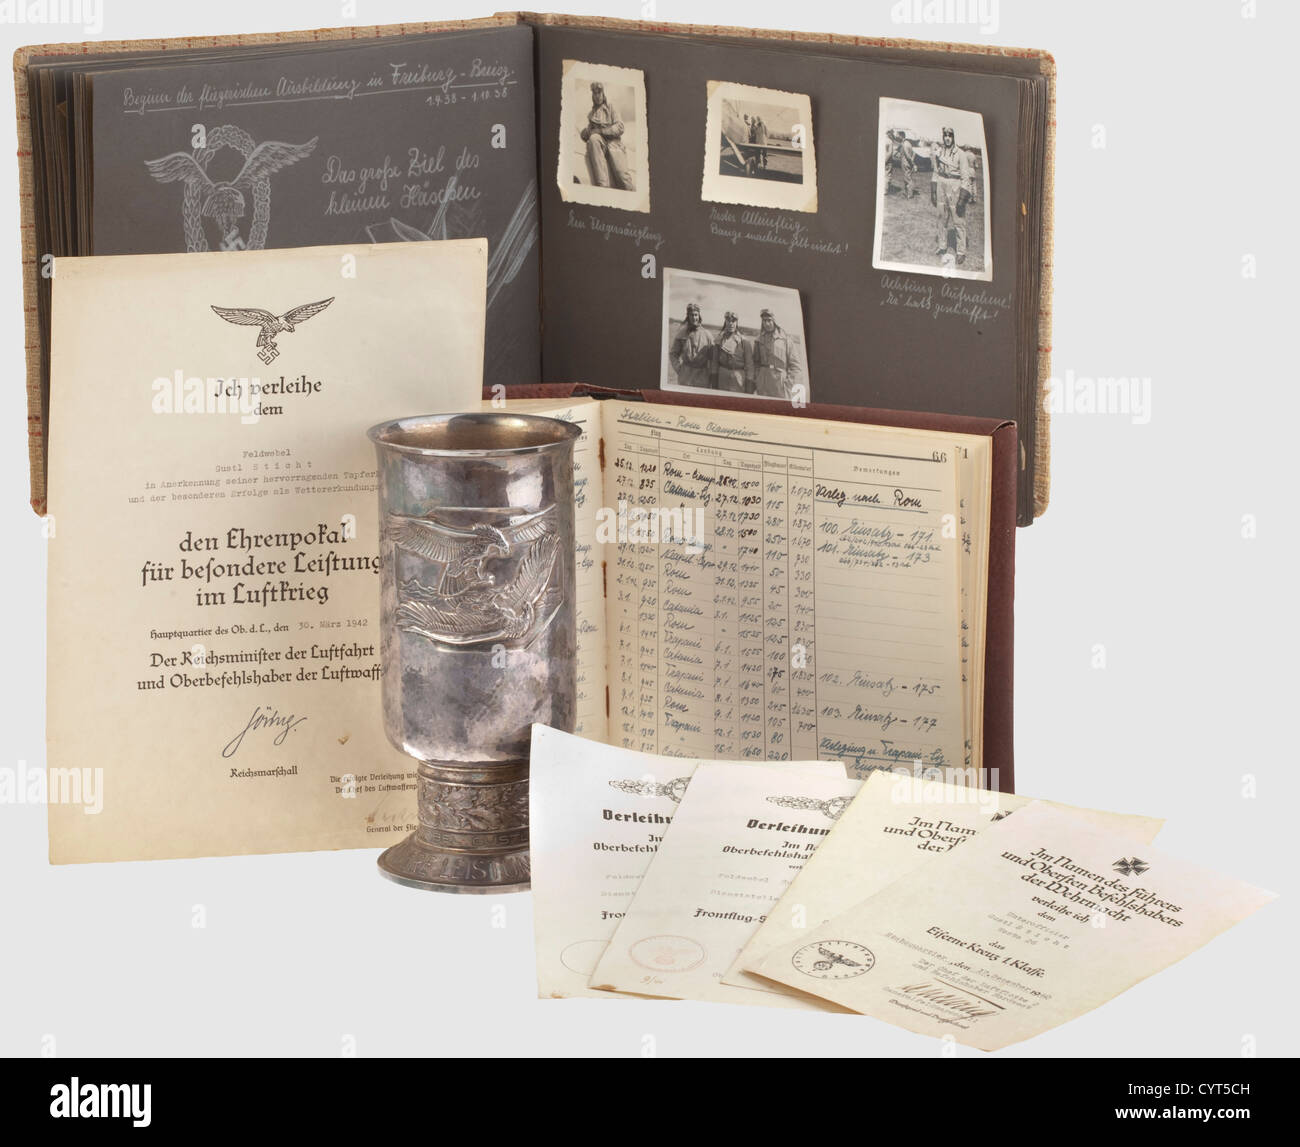 Legacy of pilot Gustl Sticht,a goblet of honour,certificates,a photo album,and a logbook of the 'Westa 26'(the 26th weather recoinnaissance squadron)A goblet of honour for outstanding achievement in the air war,the Alpaka version,engraved,'Feldwebel Gustl Sticht am 30.3.42'(Sergeant 1st Class Gustl Sticht on 30 March 1942). Height 20.8 cm,slightly dented at the base. Certificates for the honour goblet on 30 March 1942 for success as a weather service pilot,for the Iron Cross 1939,both 2nd and 1st Class,while with the 26th weather reconnaissance sq,Additional-Rights-Clearences-Not Available Stock Photo